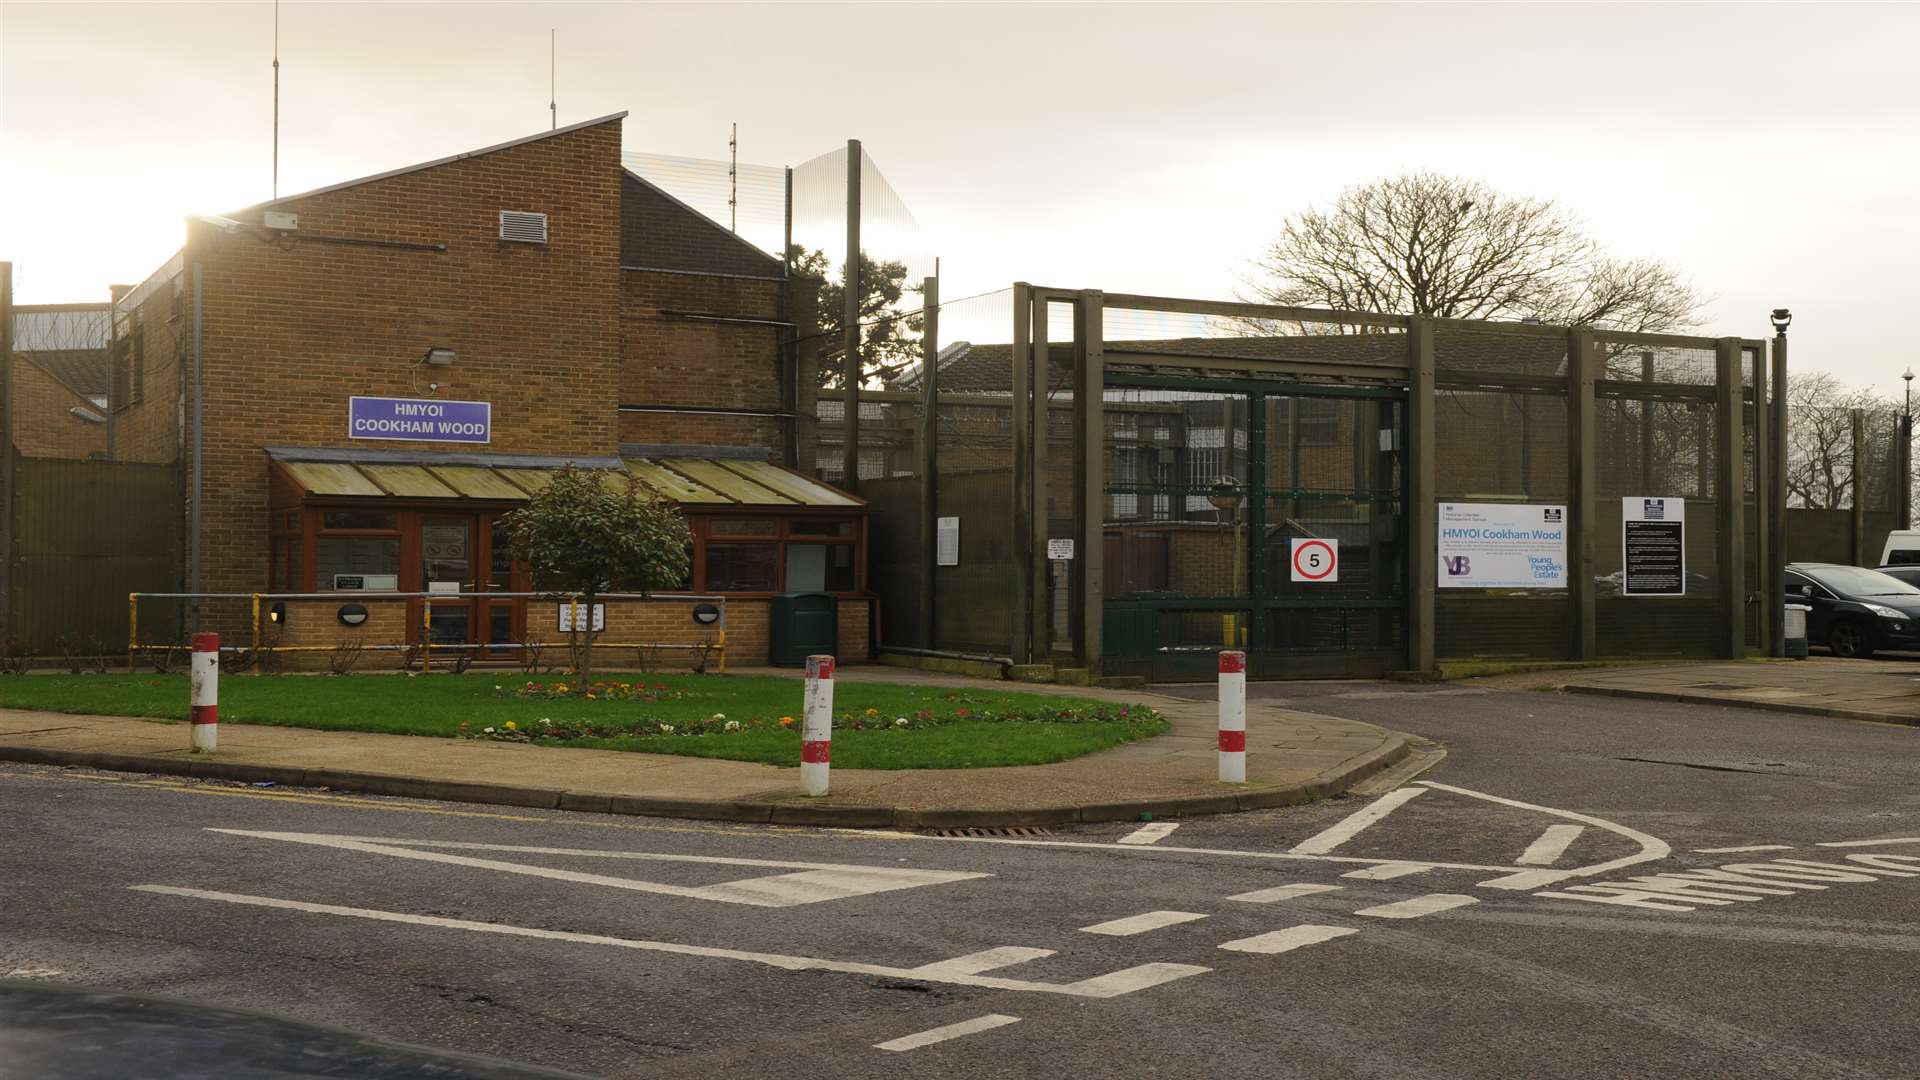 HMP Cookham Wood in Rochester